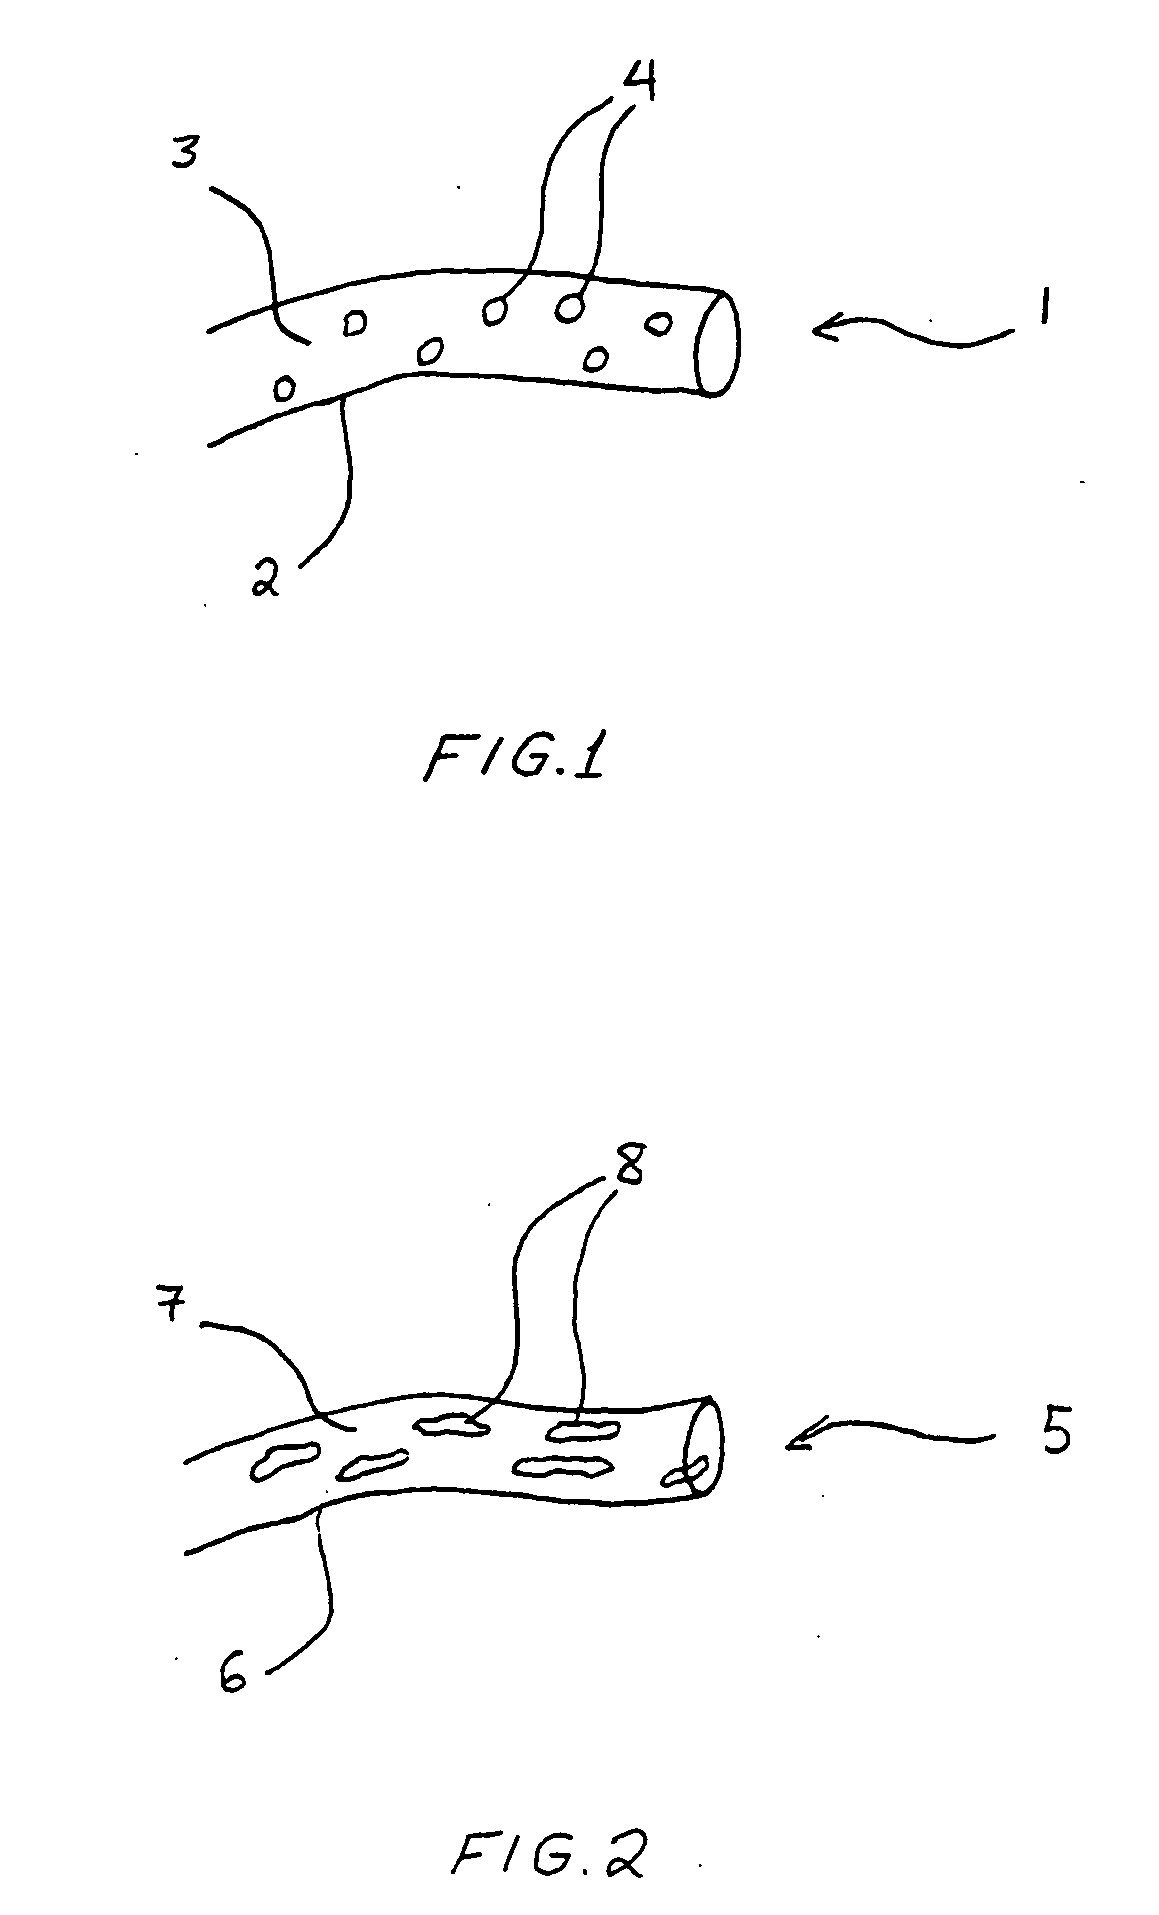 Temperature regulating cellulosic fibers and applications thereof